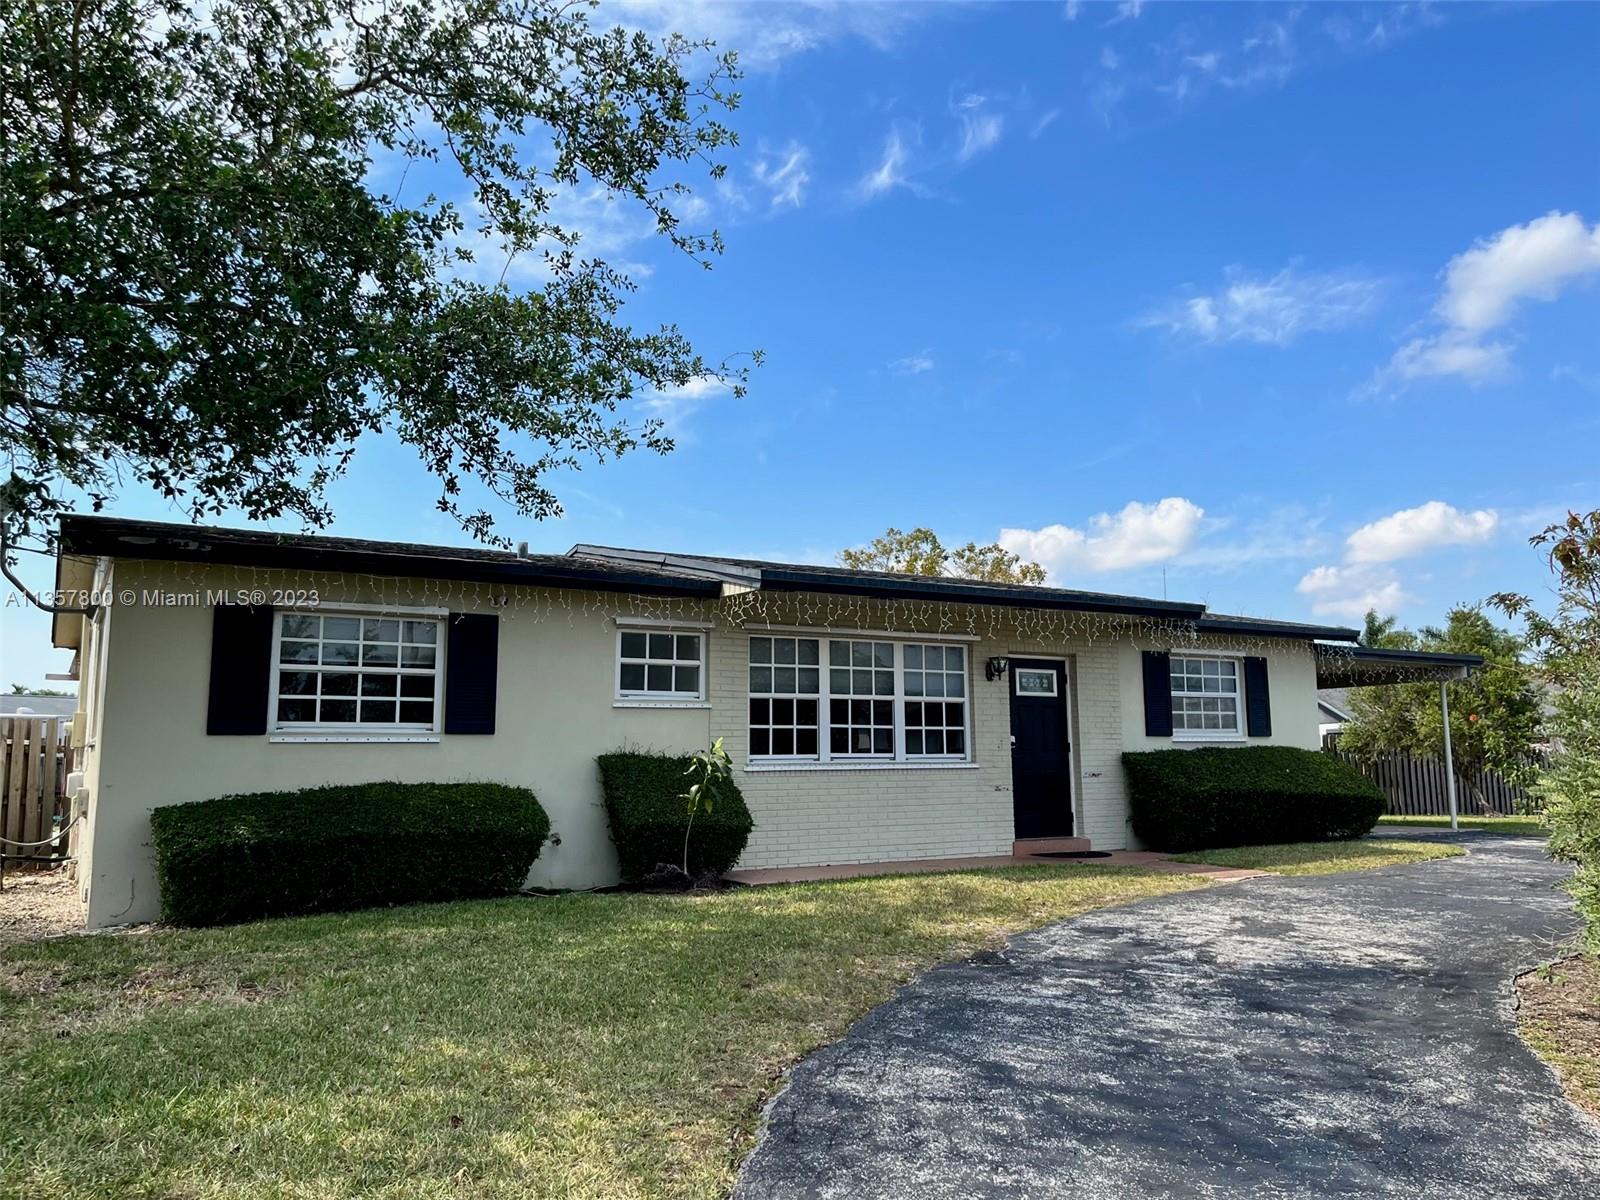 CHARMING 3/2 ON OVERSIZED CORNER LOT, PLENTY OF ROOM FOR ALL YOUR TOYS, ENTERTAINING OR KIDS TO RUN AROUND! UPDATED KITCHEN W/ WOOD CABINETS, GRANITE COUNTERS & SS APPLIANCES. TILE THROUGHOUT. COMPLETELY FENCED IN YARD AND PLENTY OF PARKING. NO HOA